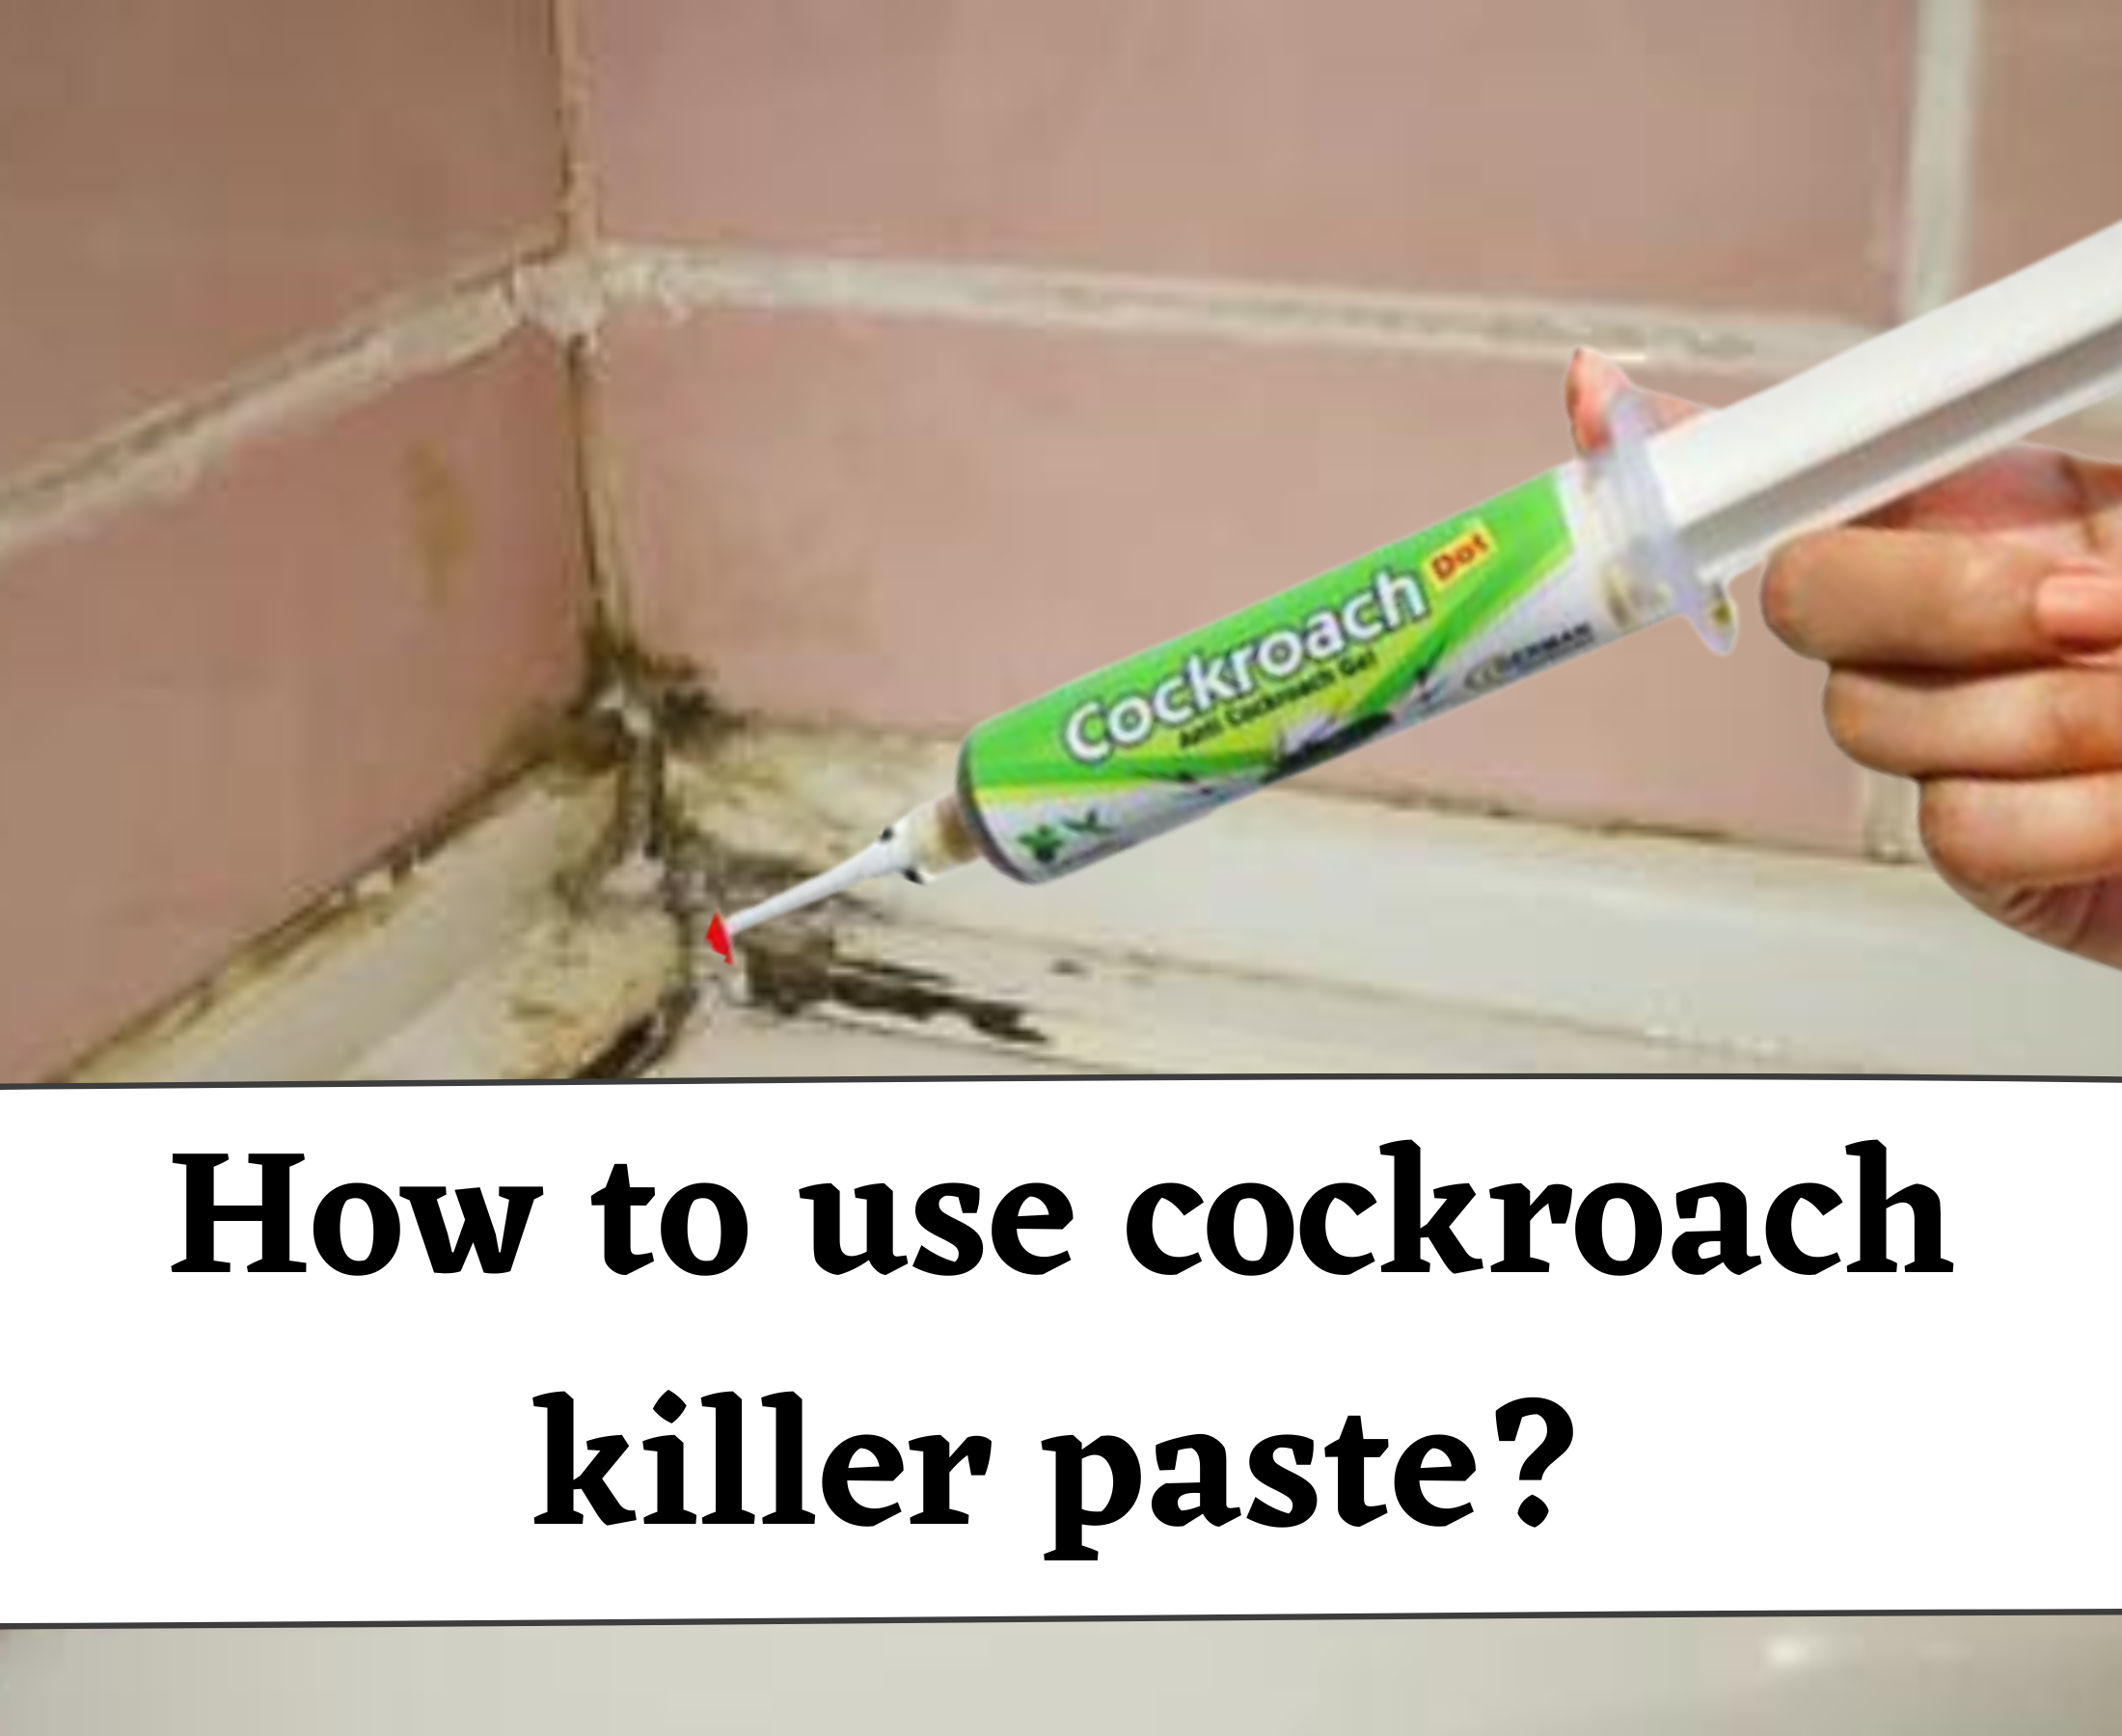 How to use cockroach killer paste/gel bait? How does it work?